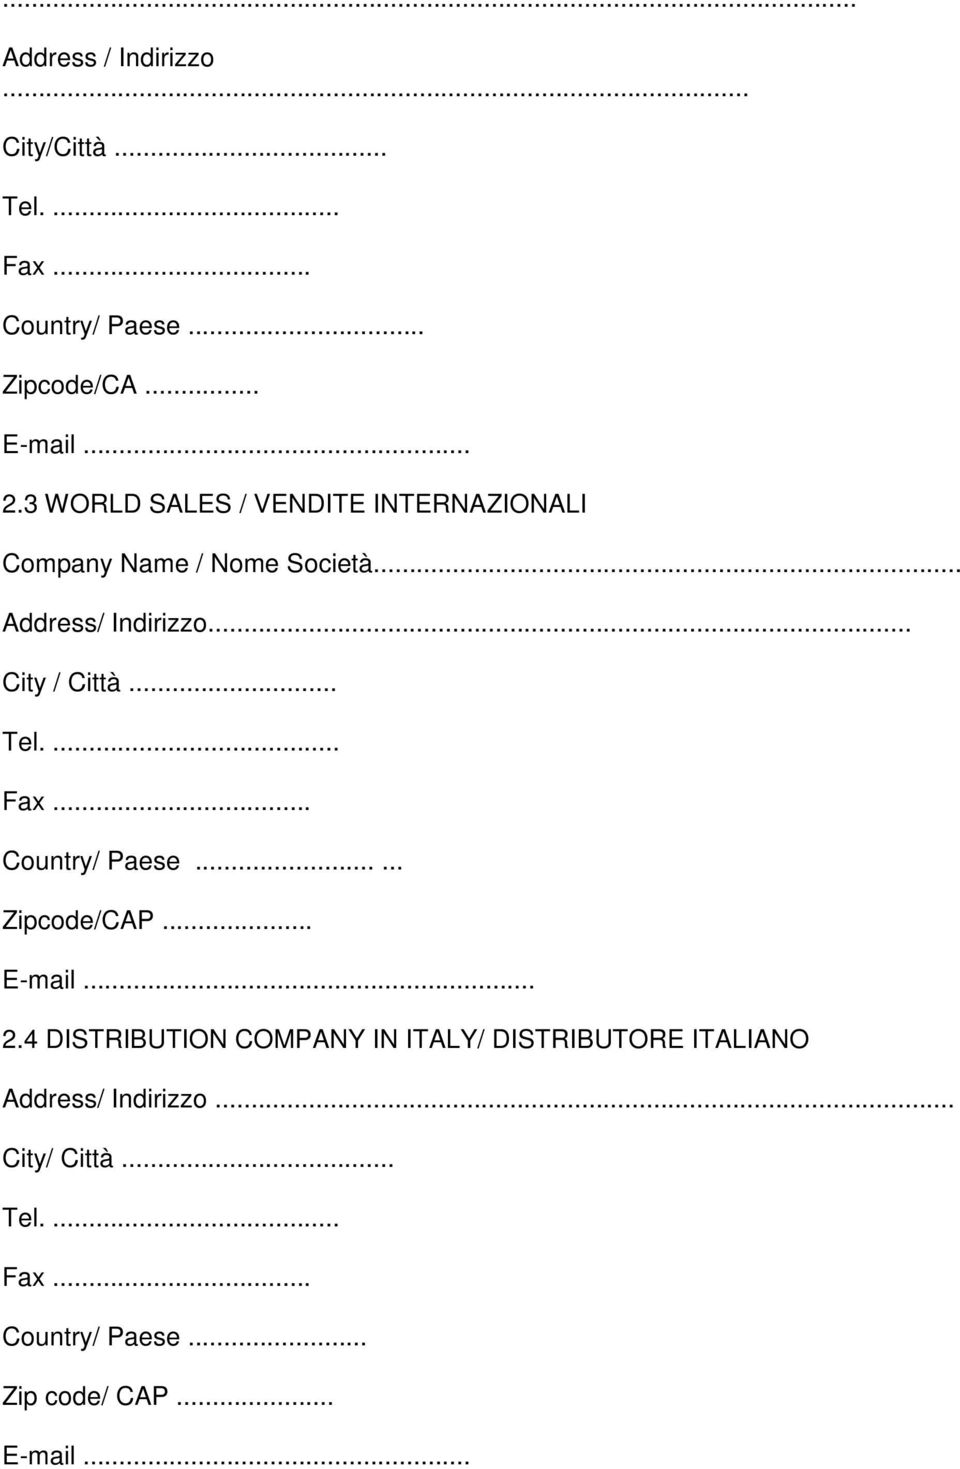 Città Country/ Paese Zipcode/CAP E-mail 24 DISTRIBUTION COMPANY IN ITALY/